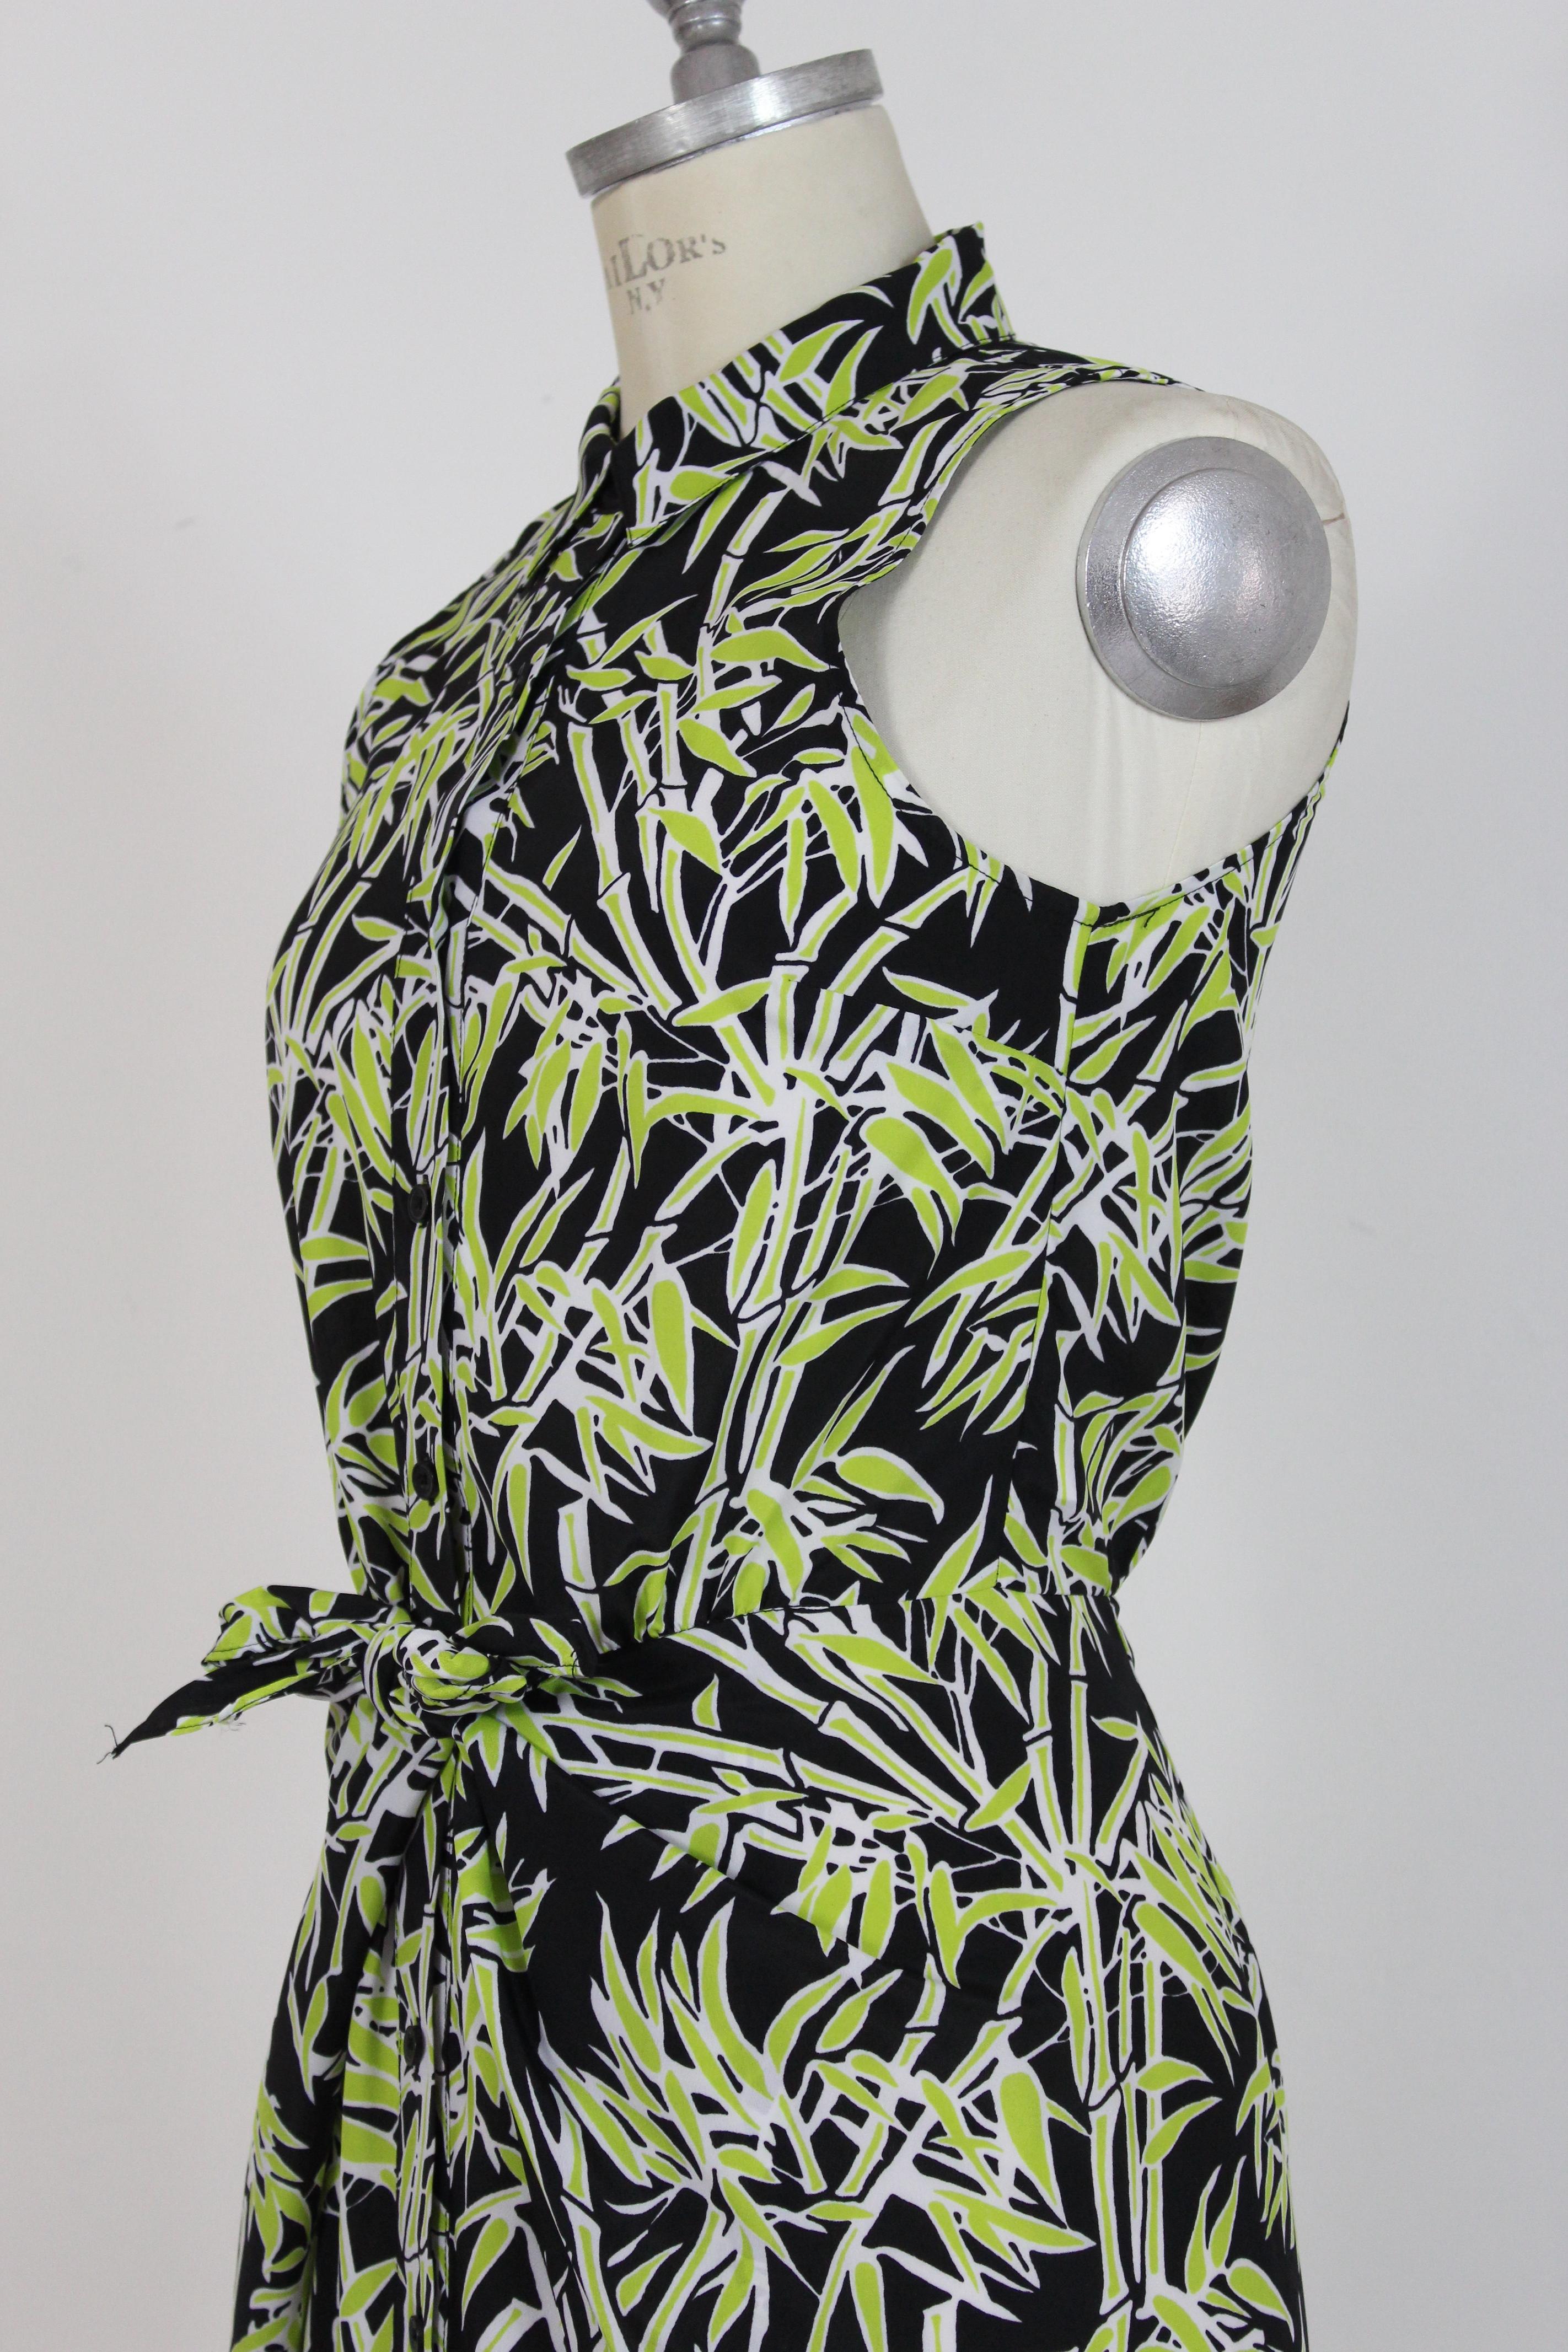 Michael Kors Green Black Floral Short Cocktail Dress In Excellent Condition For Sale In Brindisi, Bt